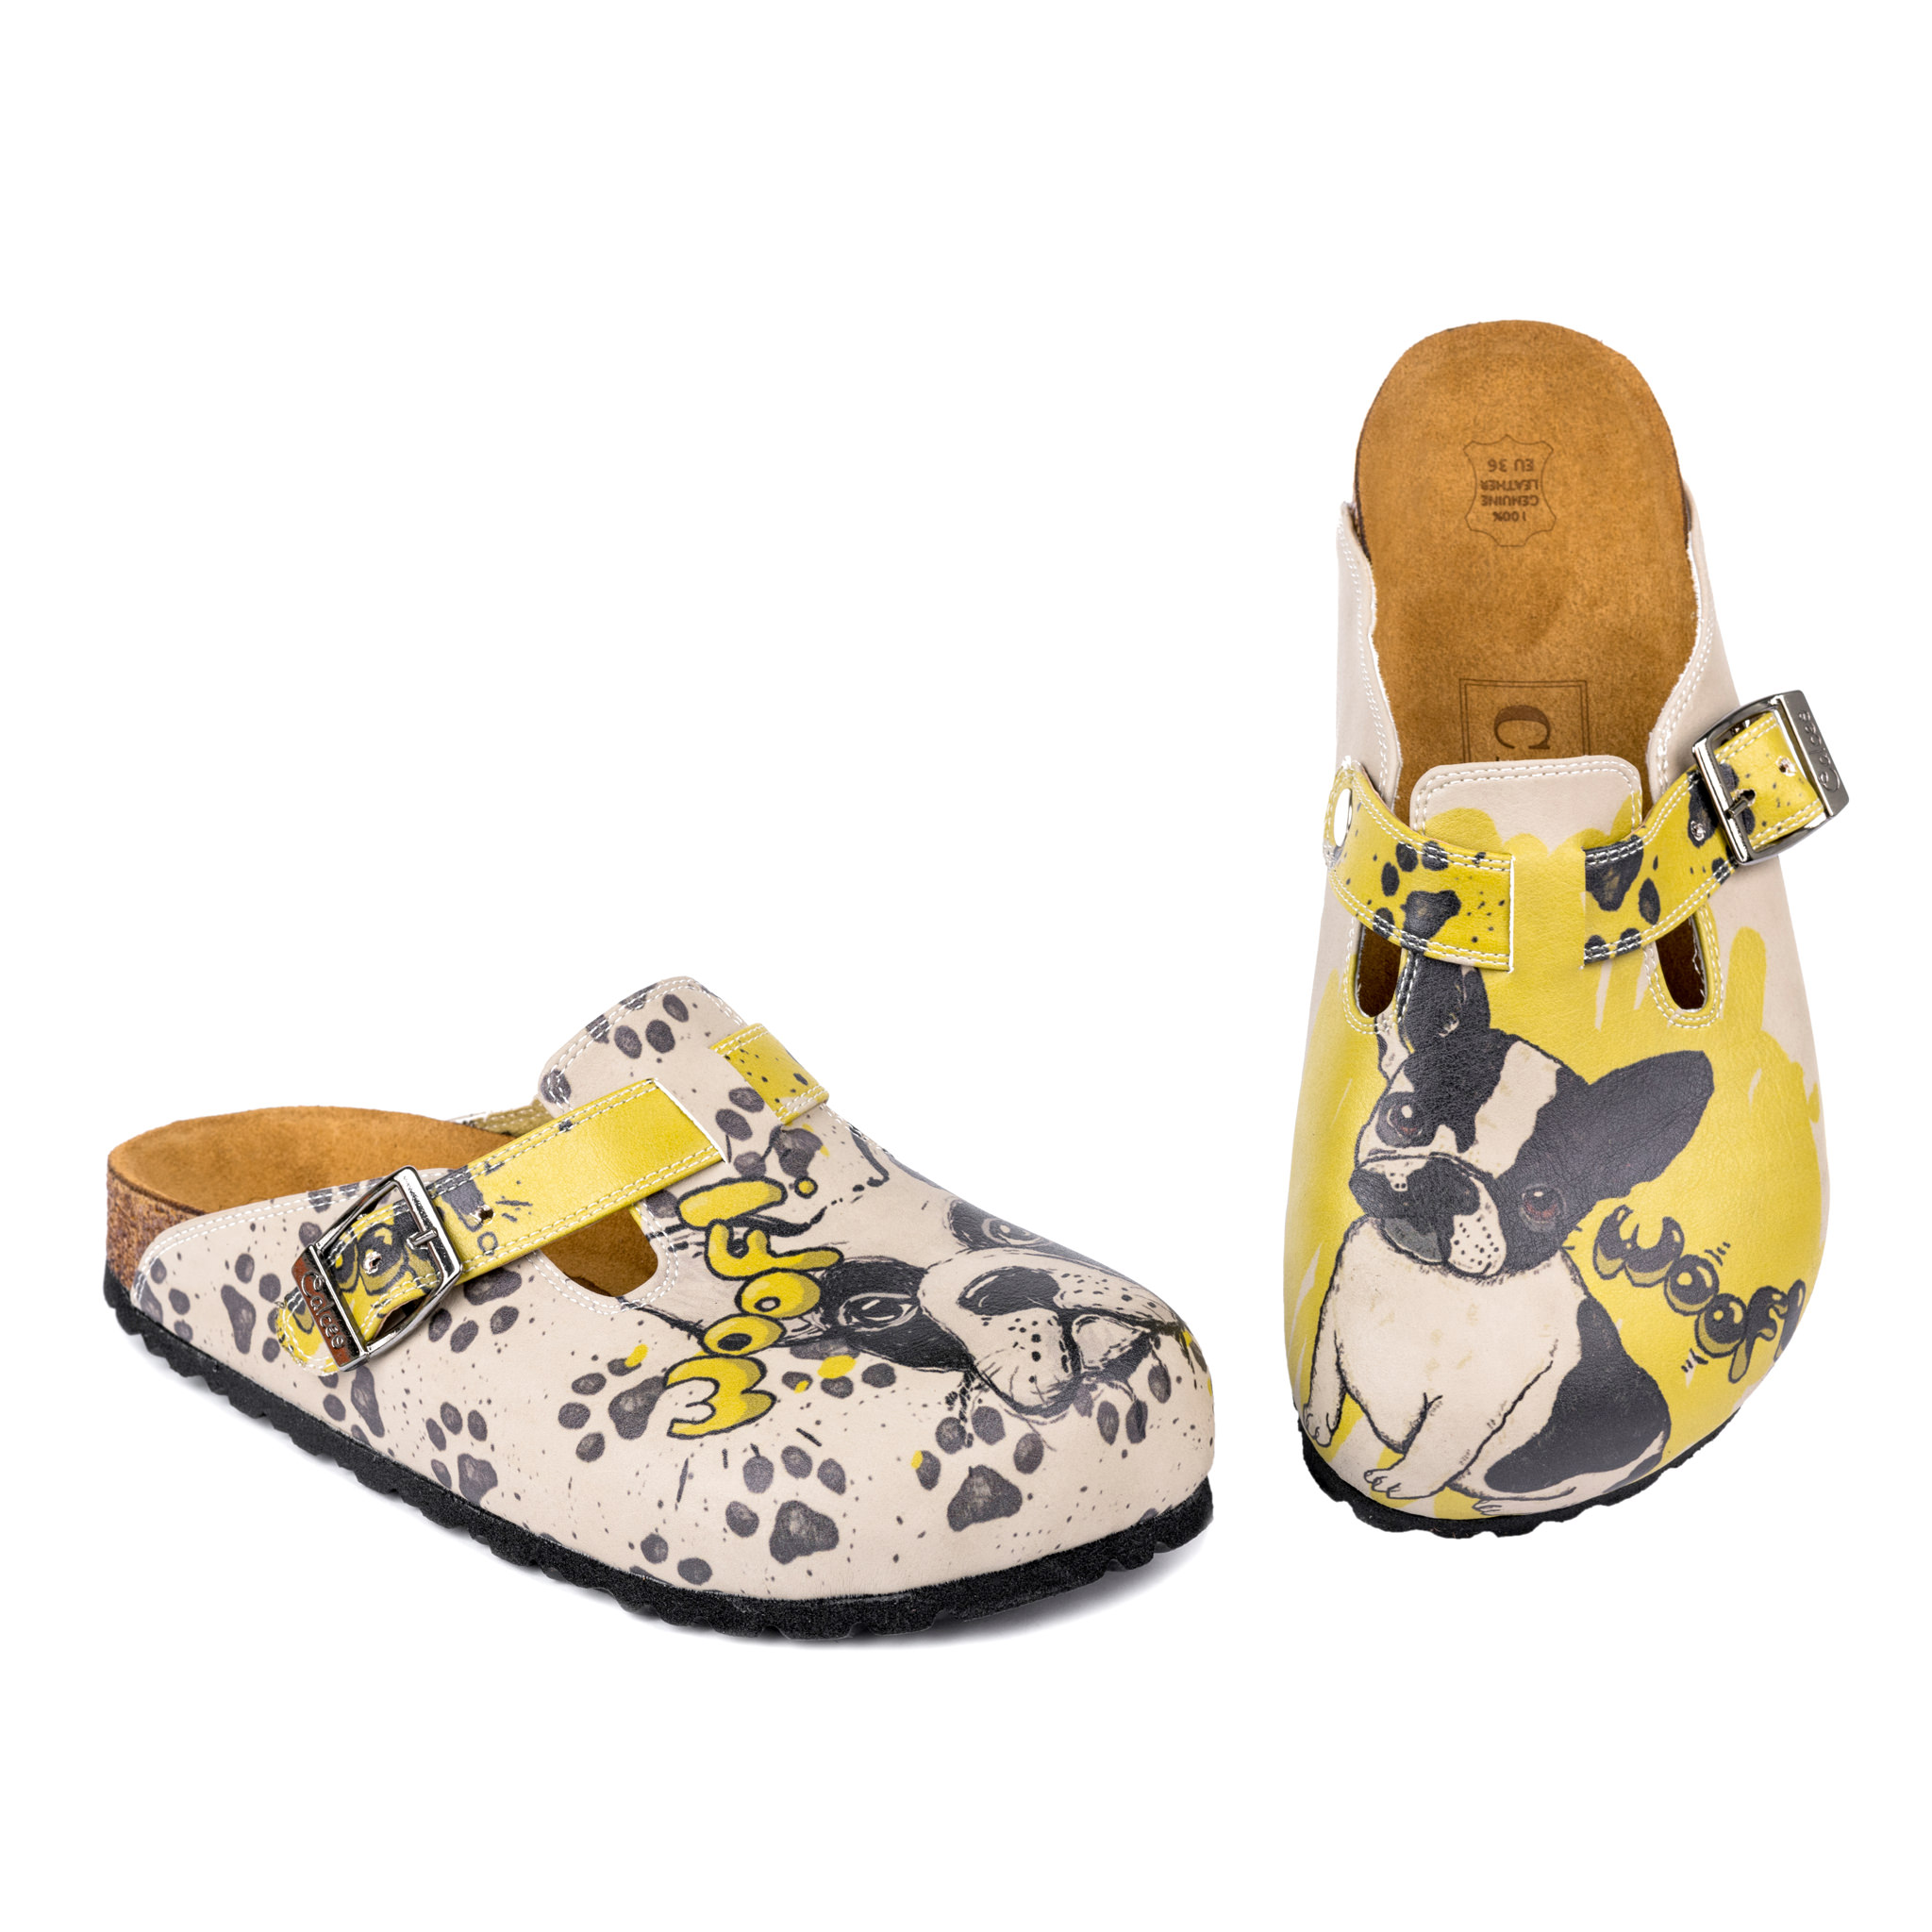 Patterned women clogs A158 - DOG - YELLOW